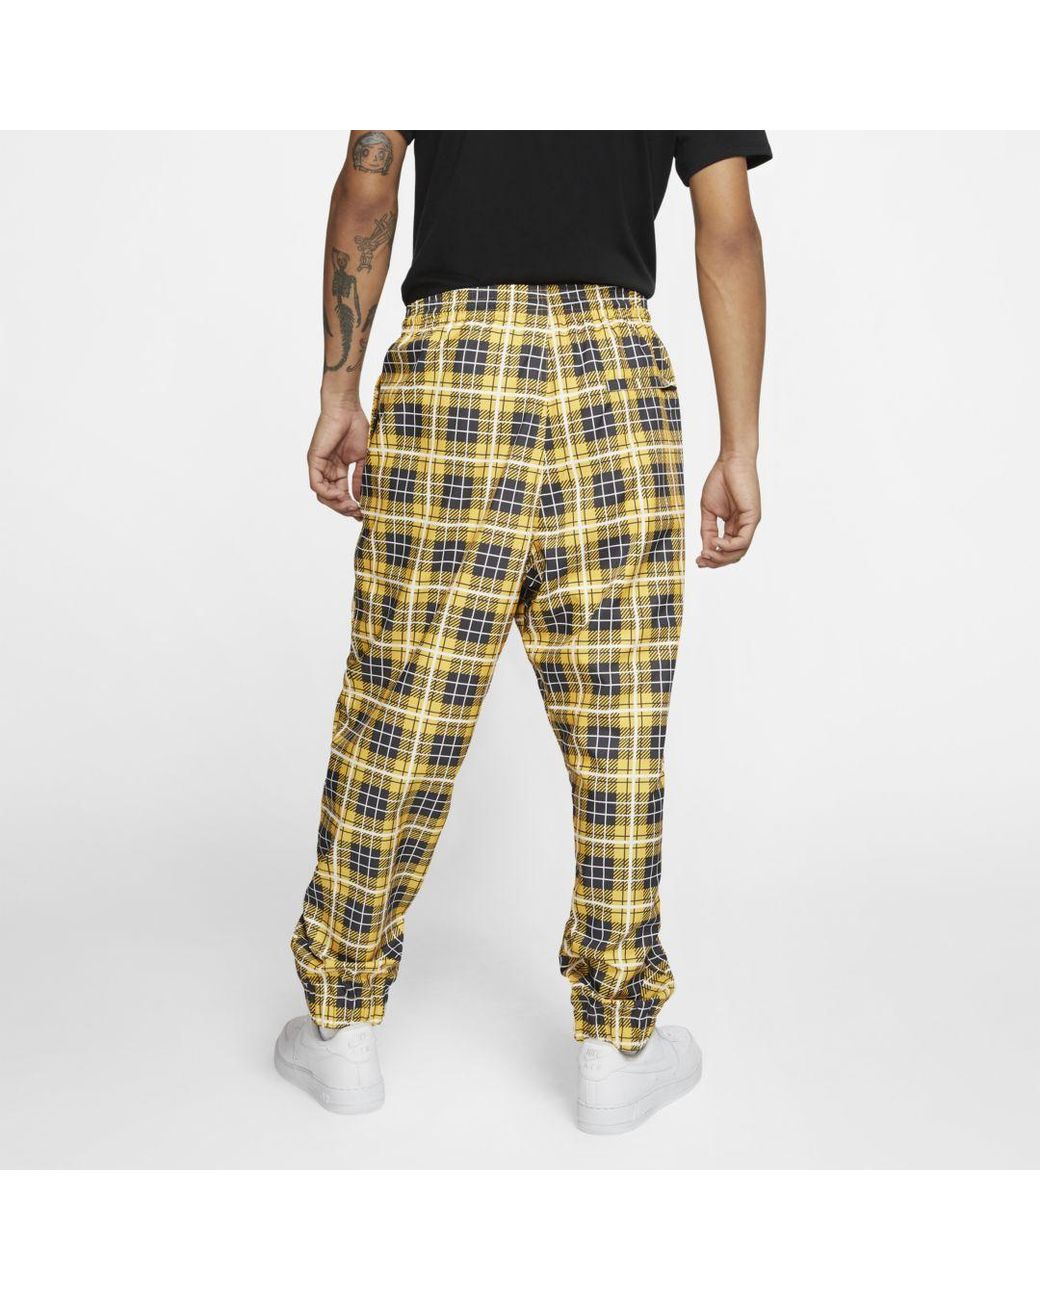 Nike Woven Plaid Track Pants for Men | Lyst